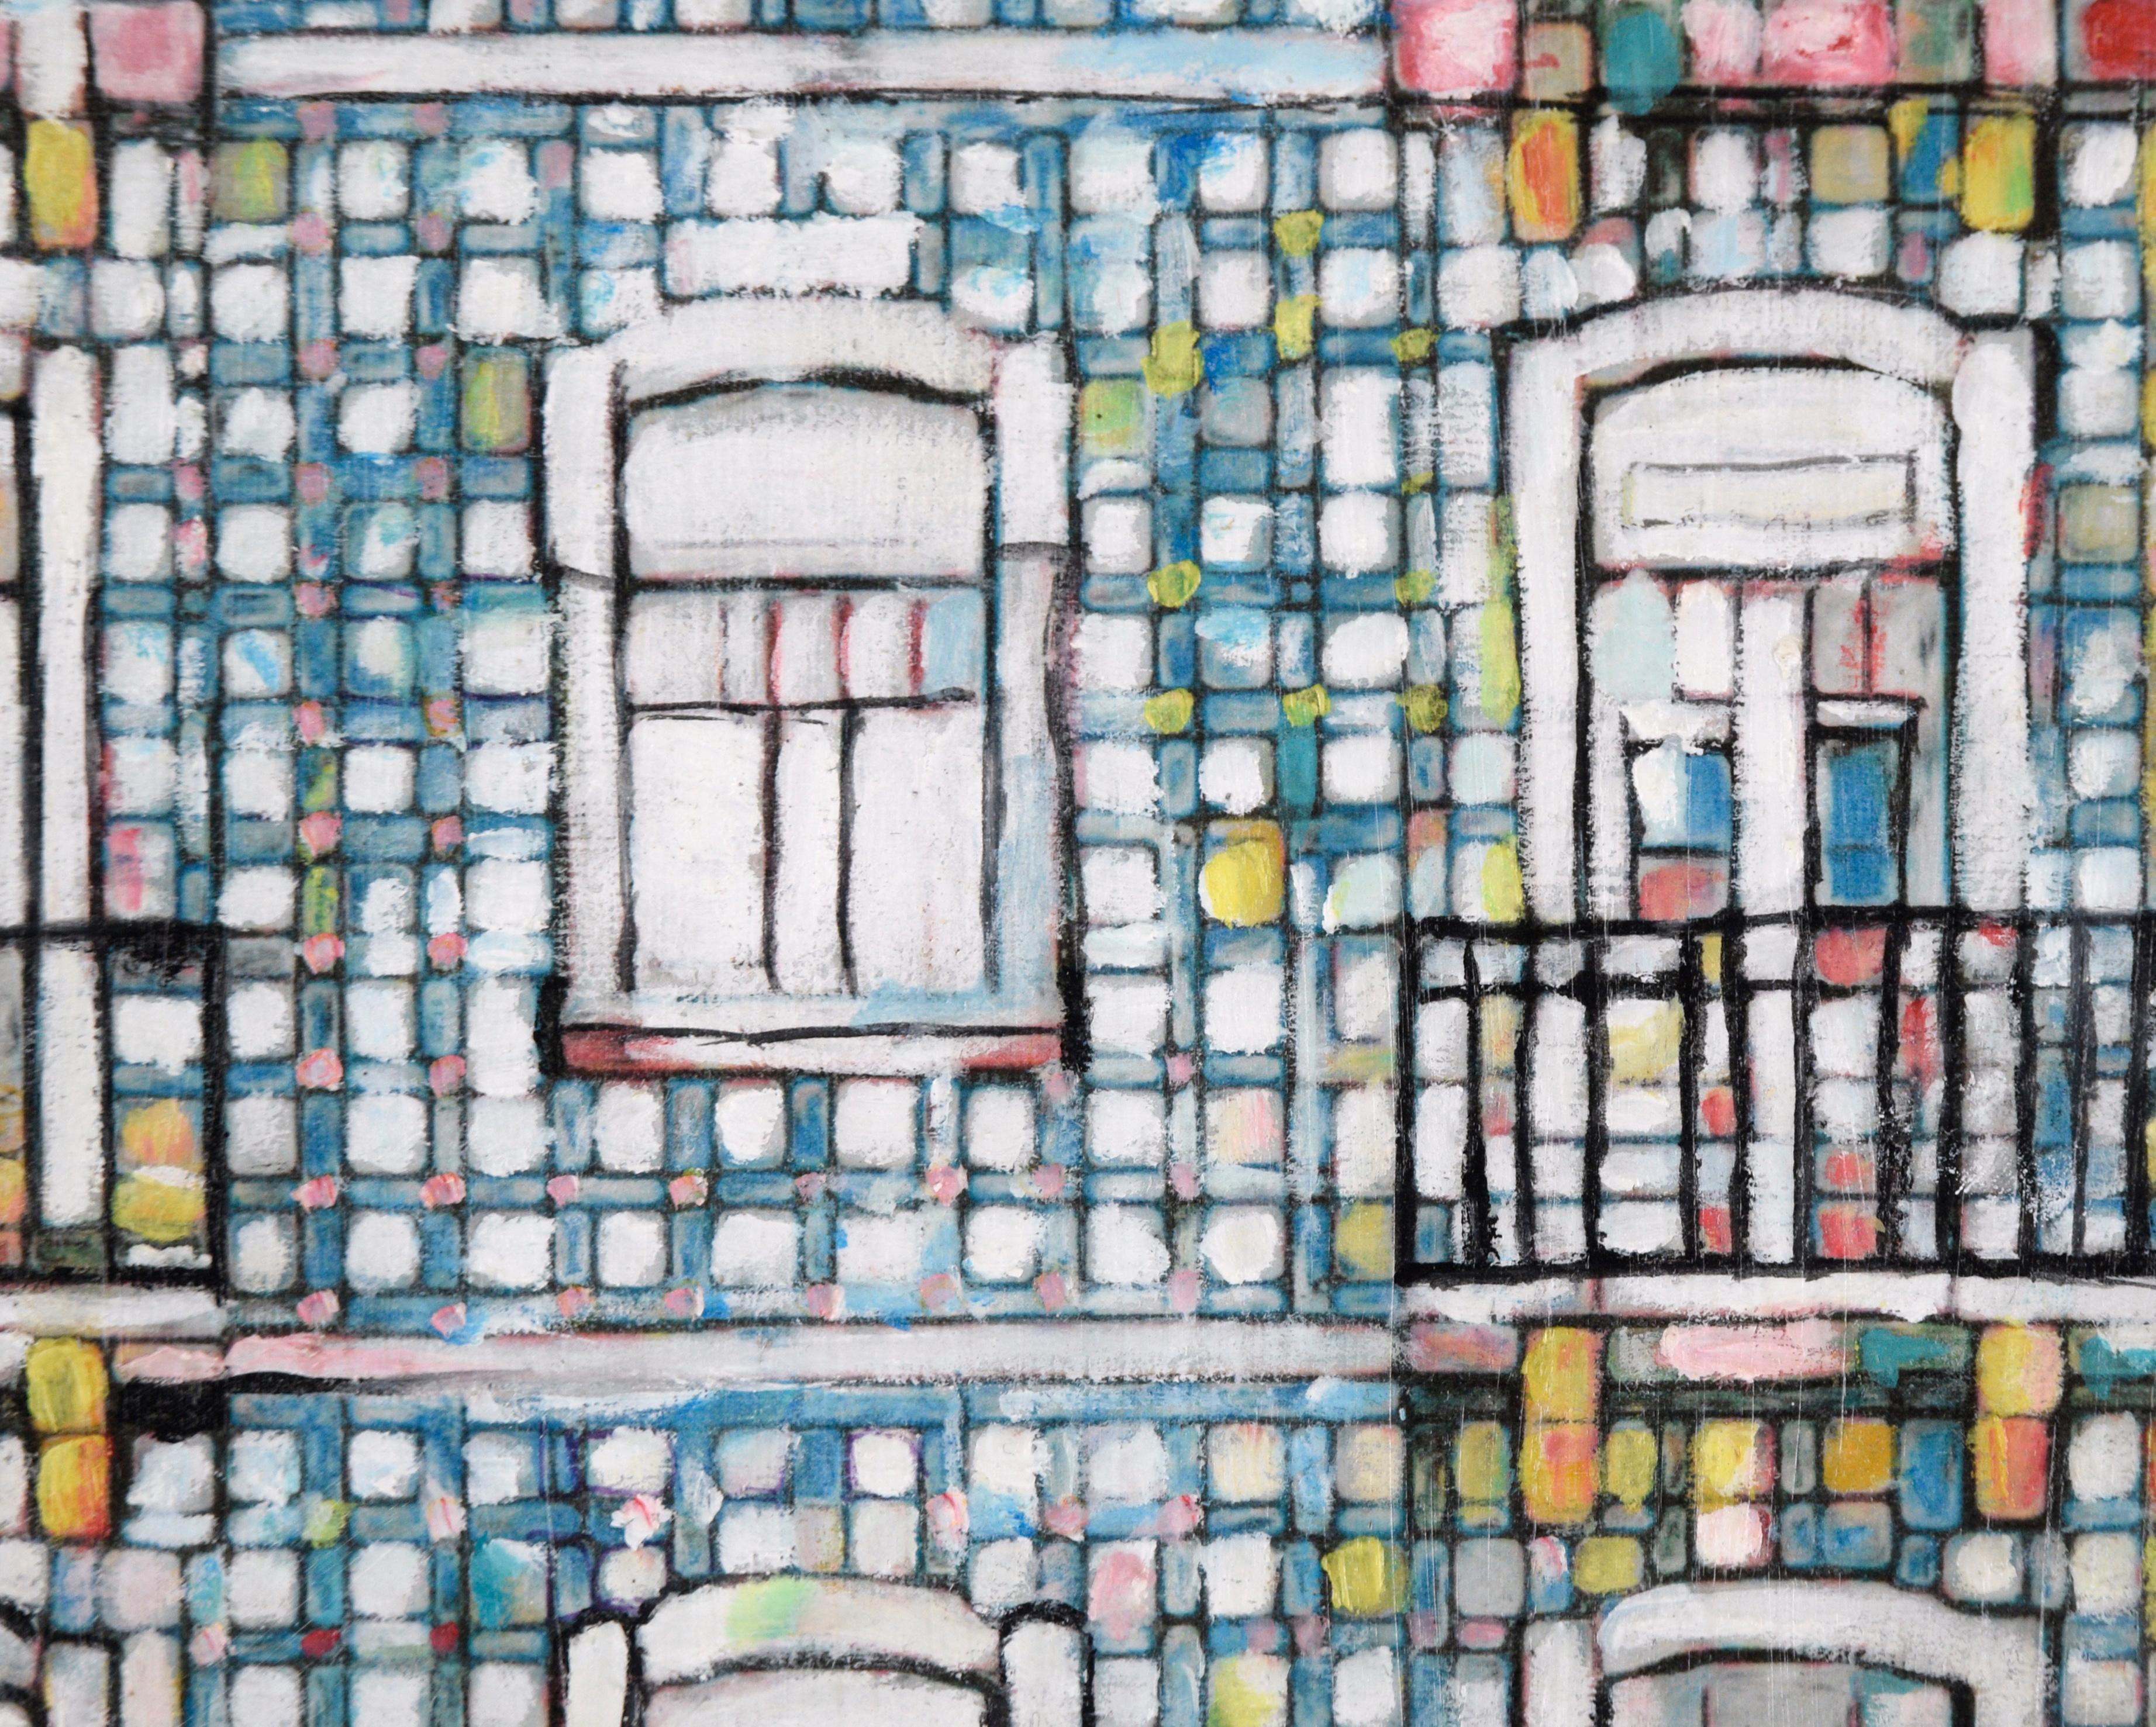 Portuguese Windows #1 - Contemporary Painting by Ana Doolin